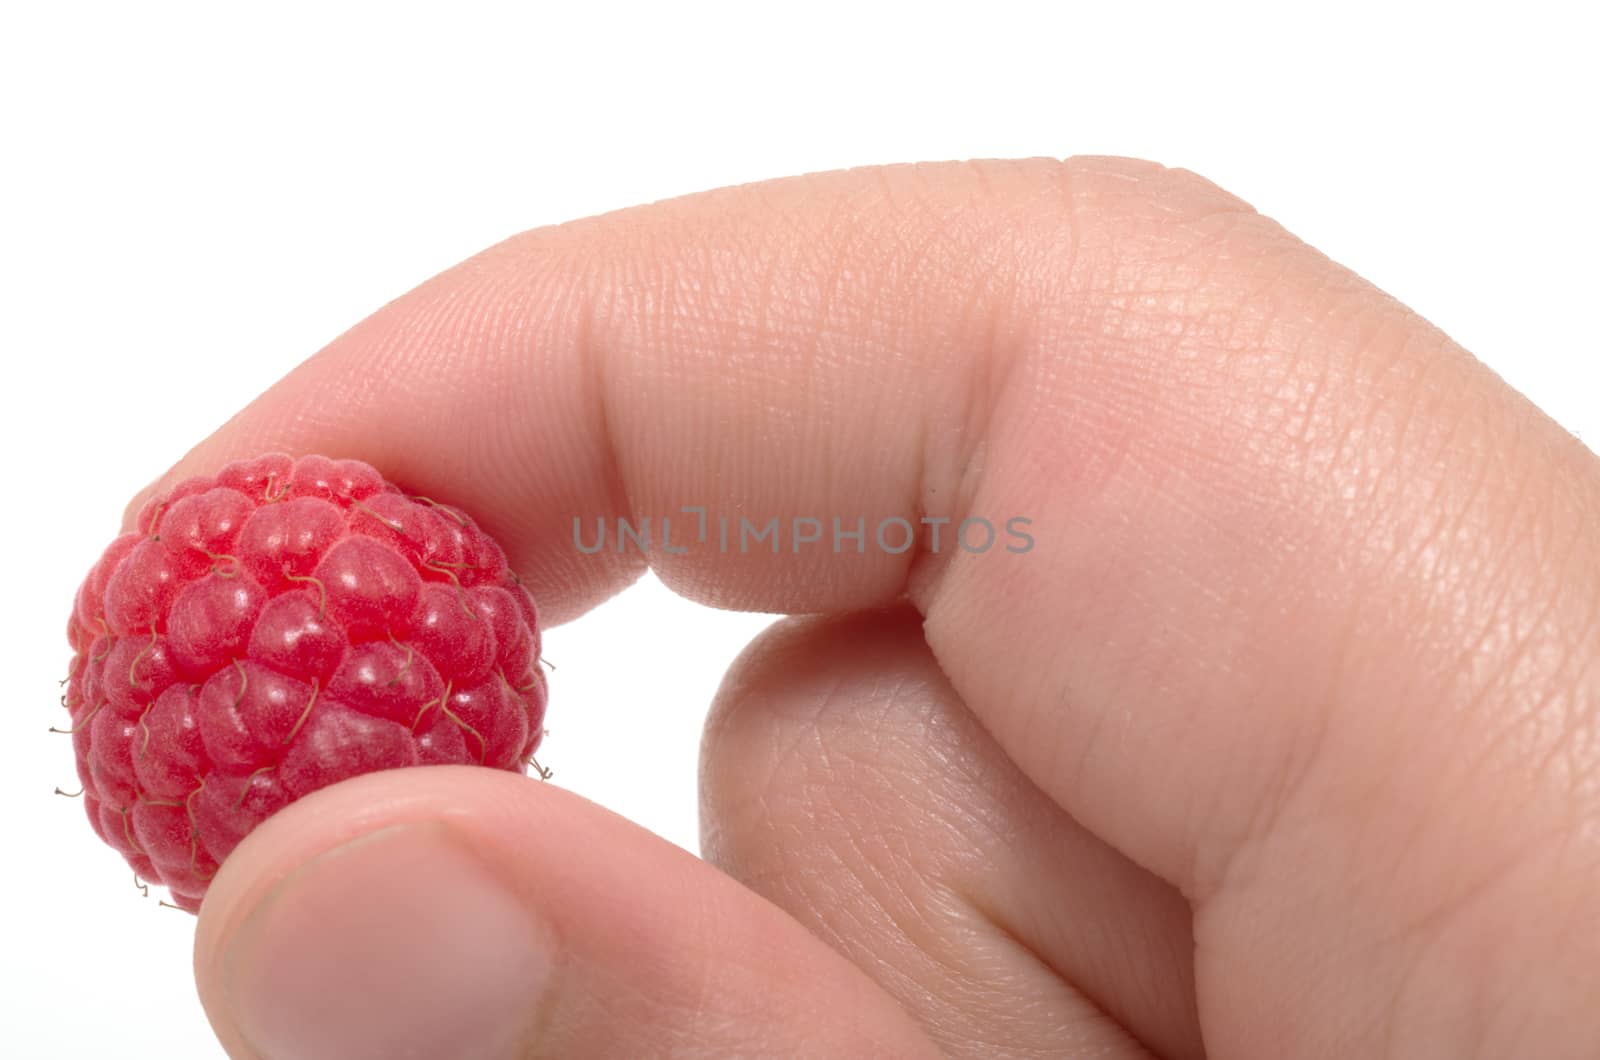 Child hand holding one red raspberry